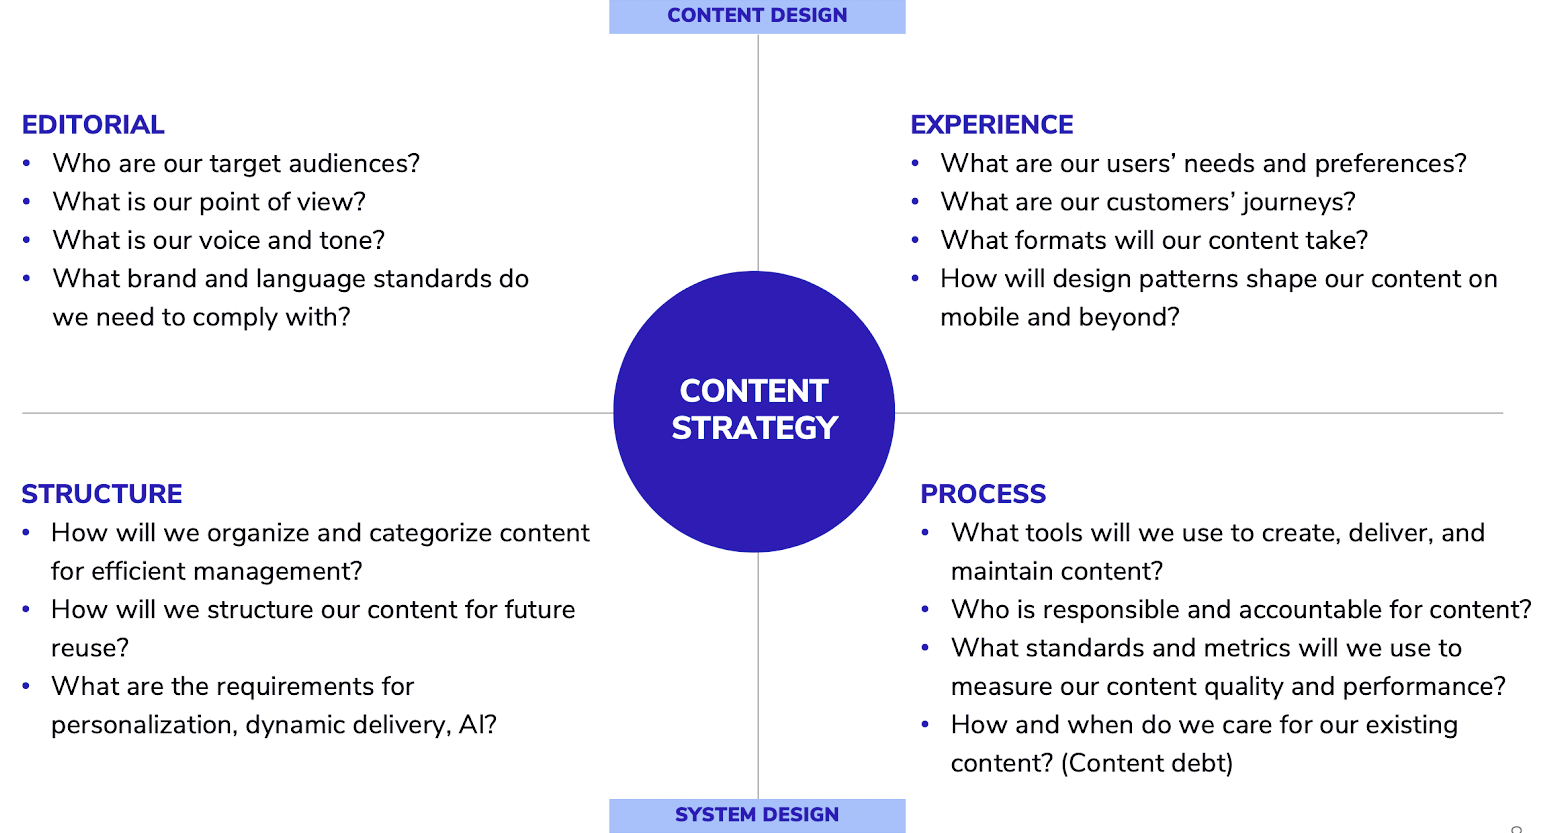 image with content strategy and the question you should ask to shape that strategy